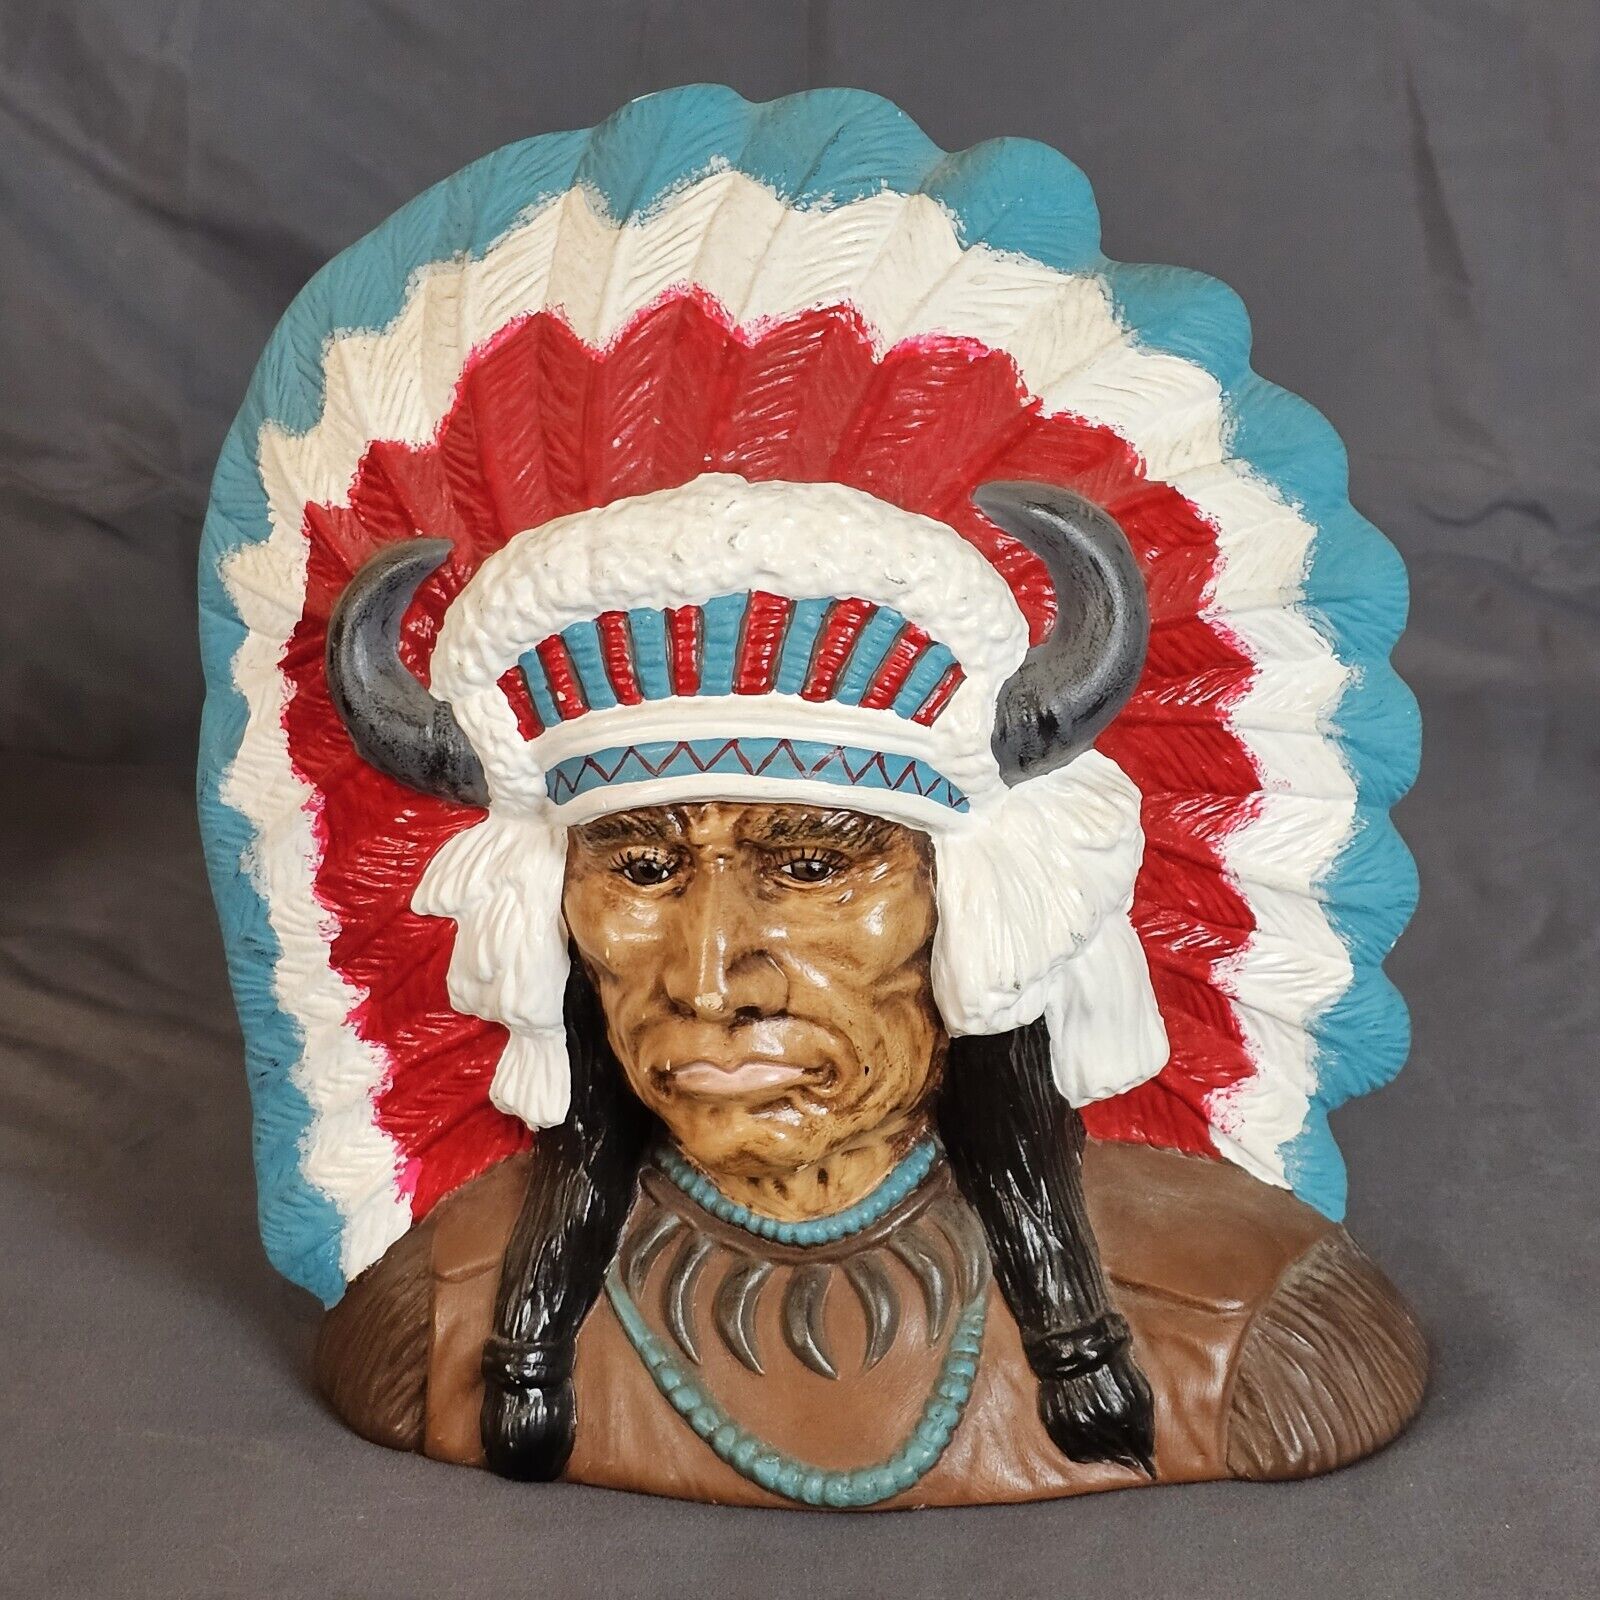 Vintage Native American Indian Chief Bookend Handpainted Ceramic Made In 1976